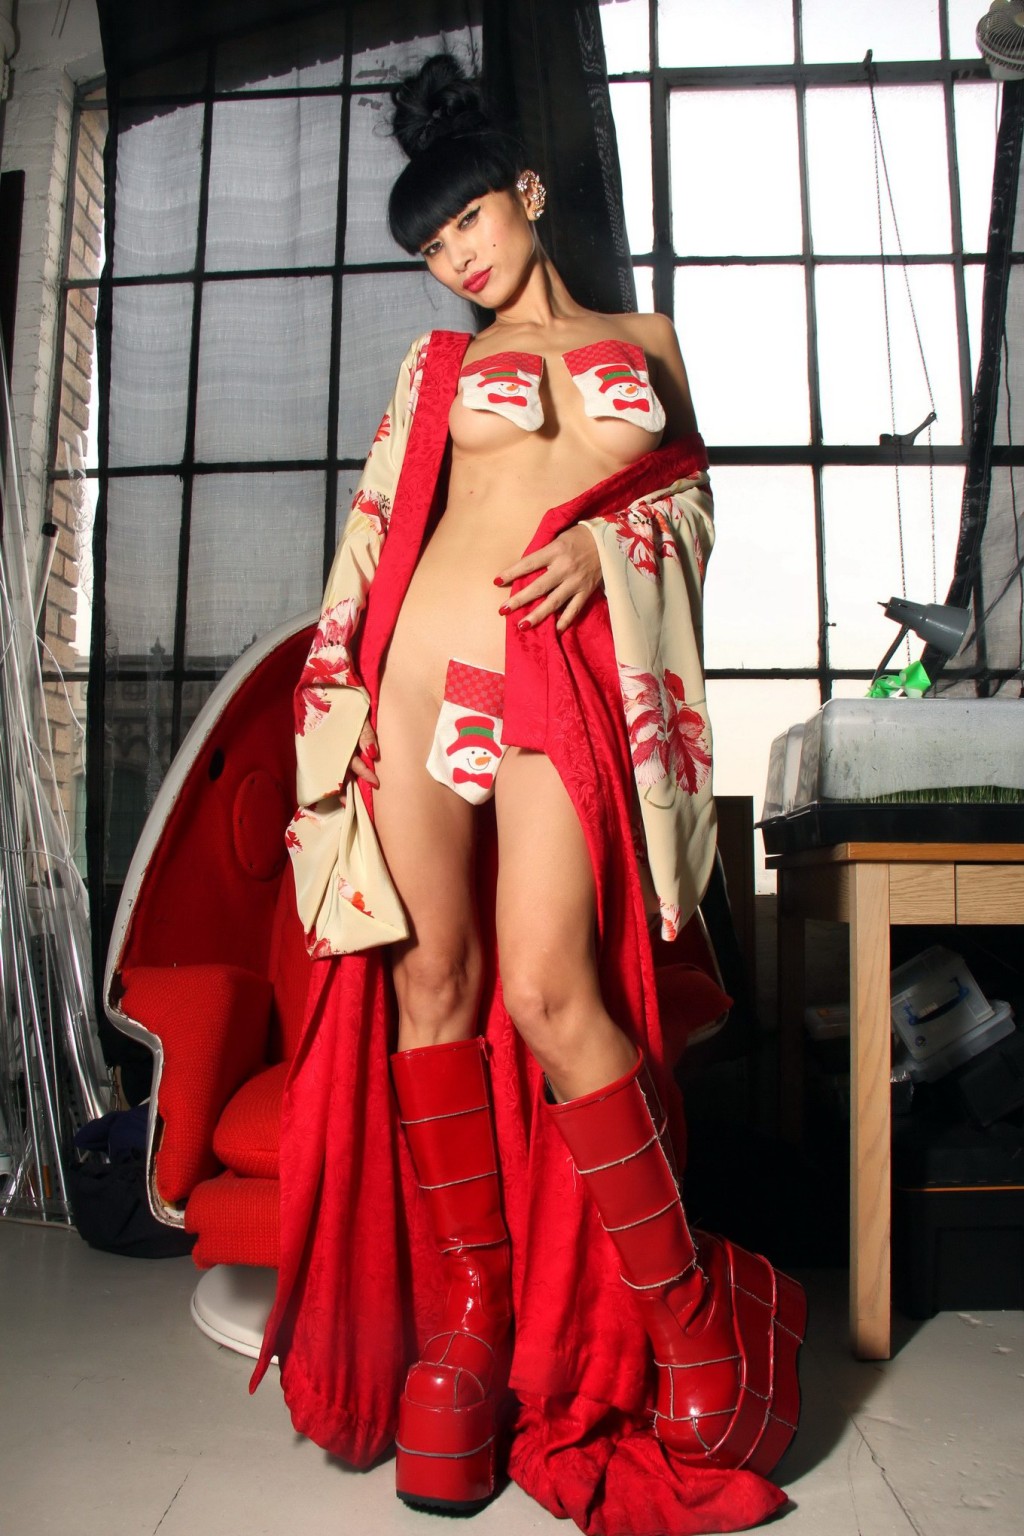 Bai Ling fully naked but hiding for Christmas 2014 photoshoot #75177286